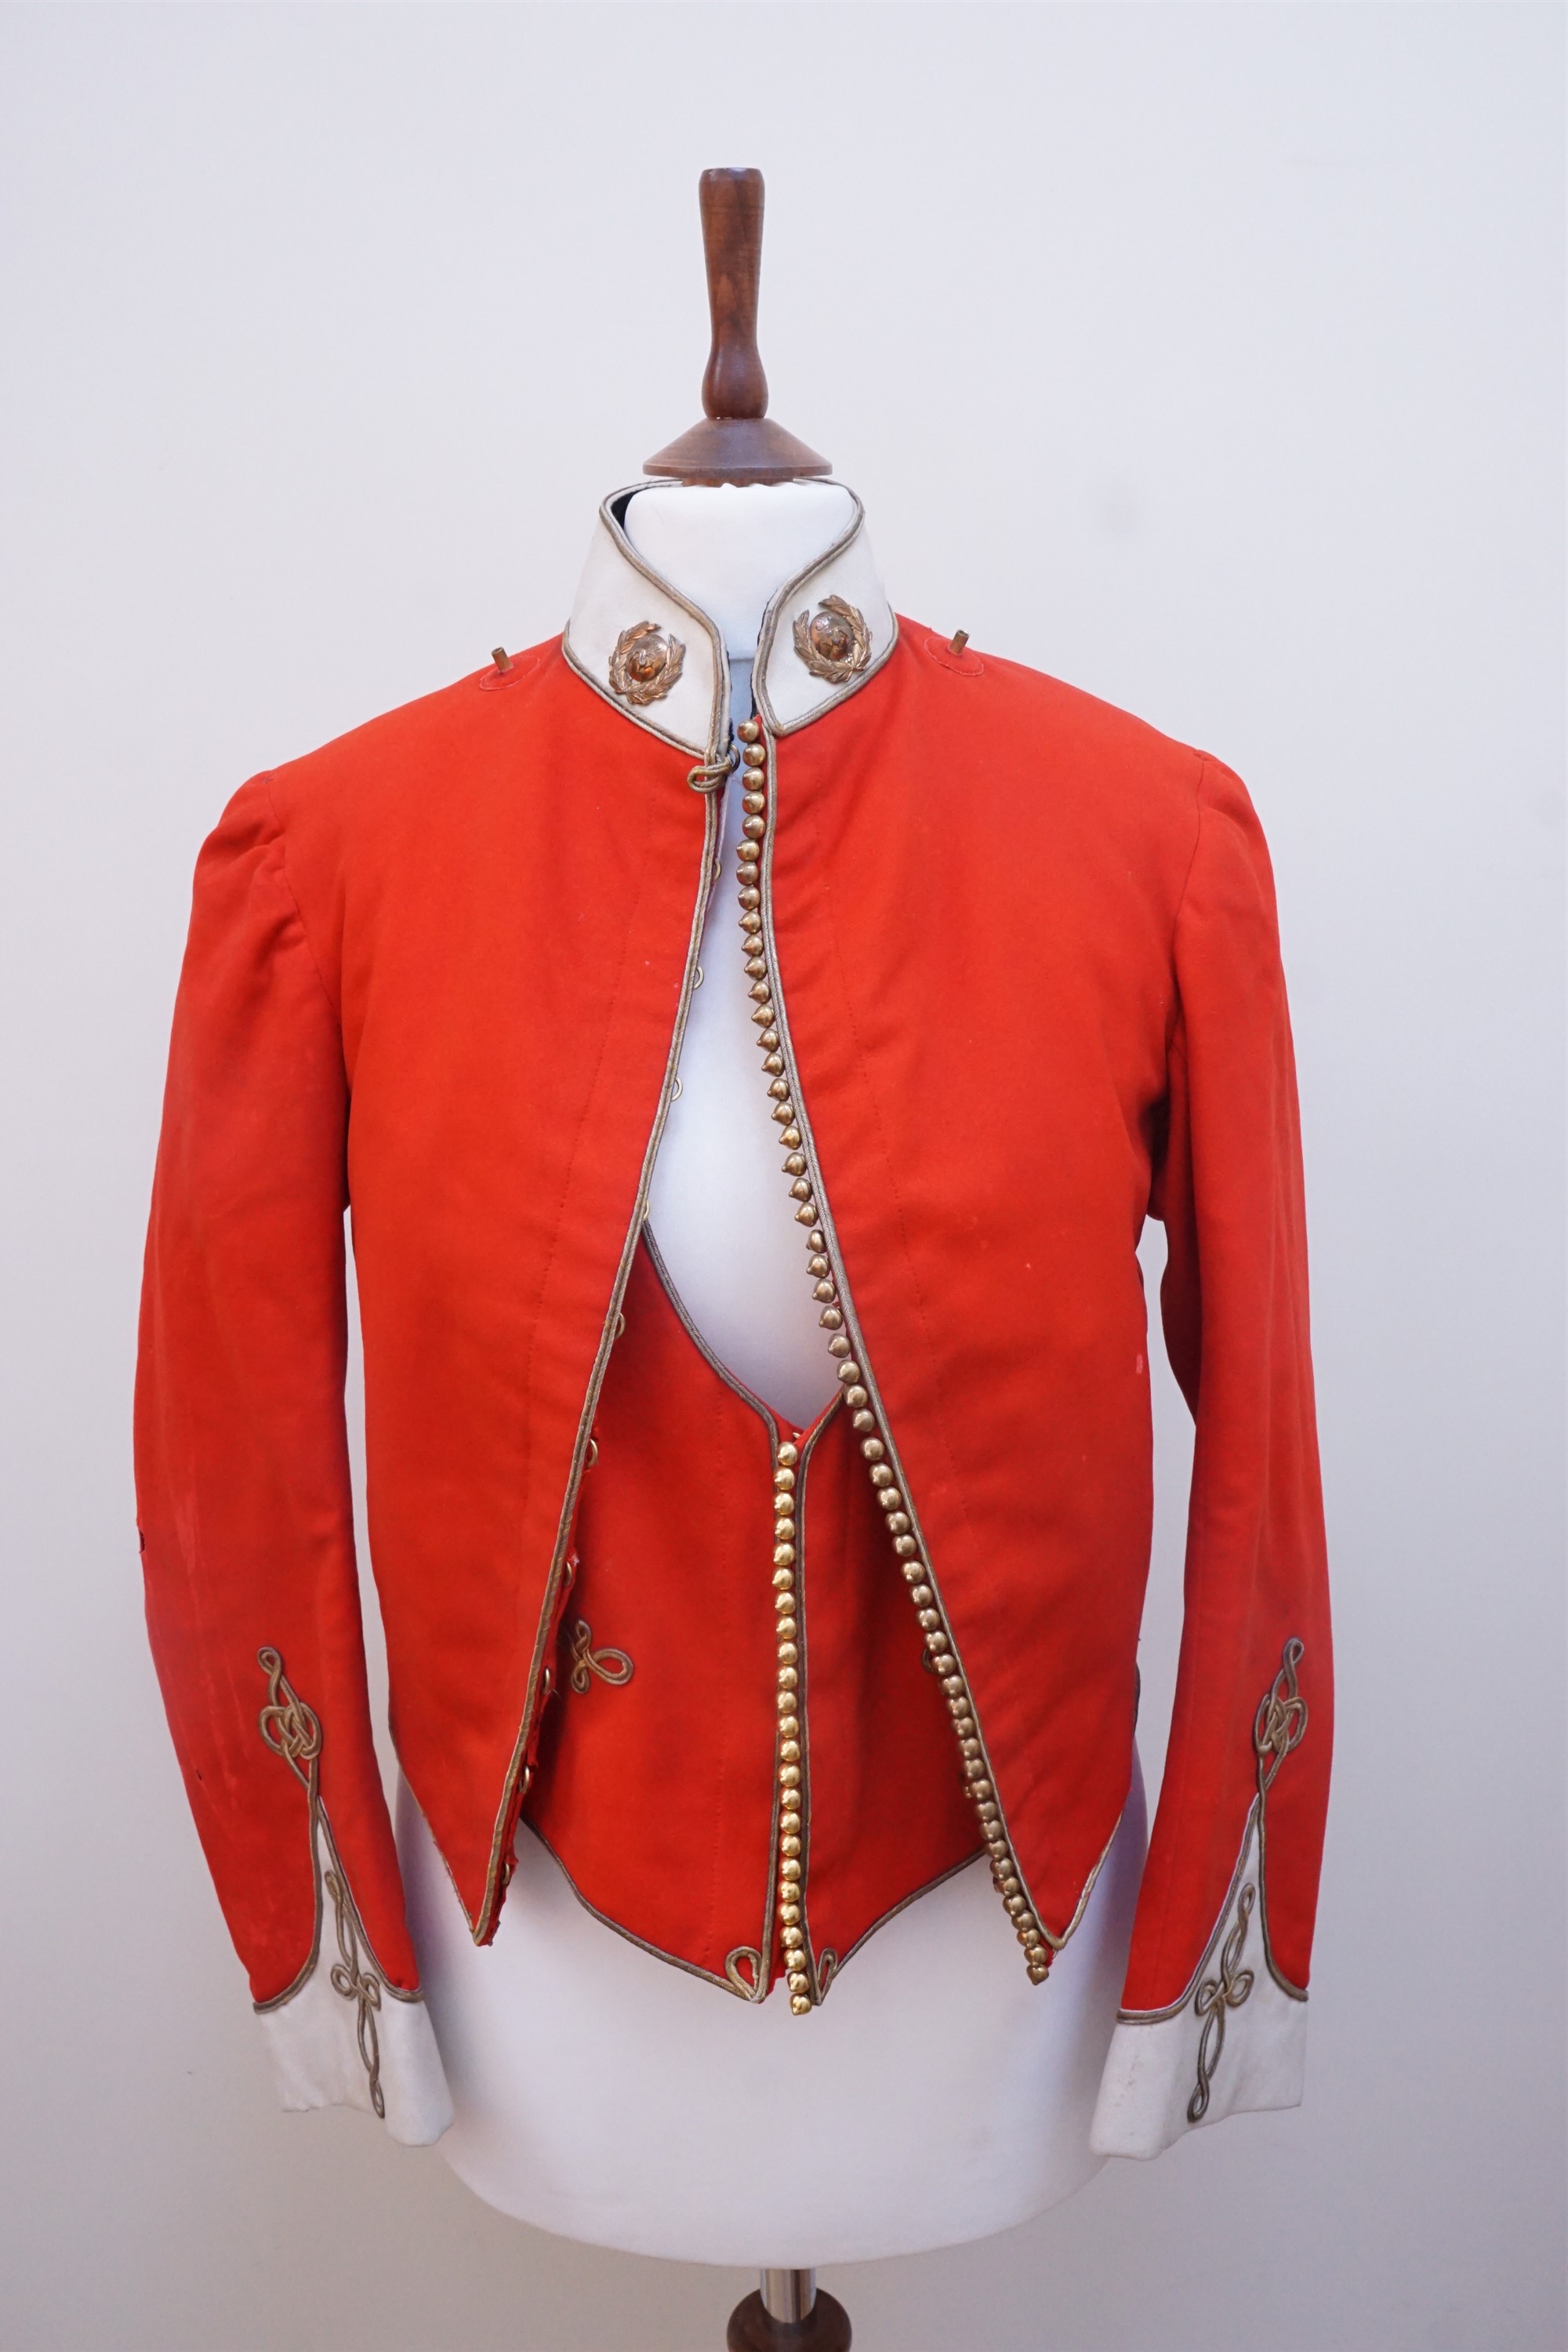 A late 19th / early 20th Century Border Regiment officer's mess dress jacket and vest, together with - Image 8 of 12